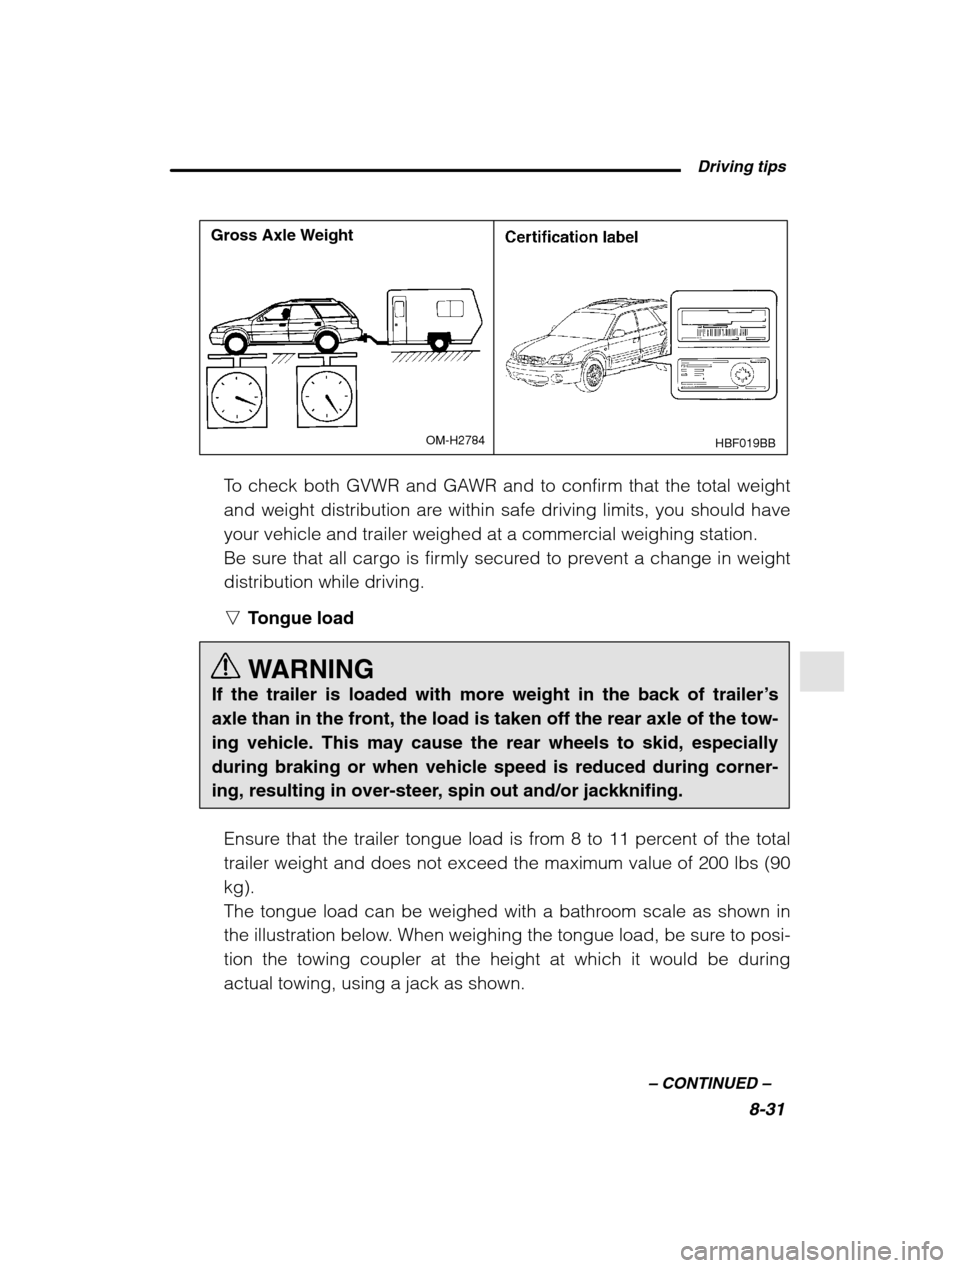 SUBARU OUTBACK 2002 3.G Owners Manual  Driving tips8-31
–
 CONTINUED  –
HBF019BB
Gross Axle Weight
OM-H2784
To check both GVWR and GAWR and to confirm that the total weight 
and weight distribution are within safe driving limits, you 